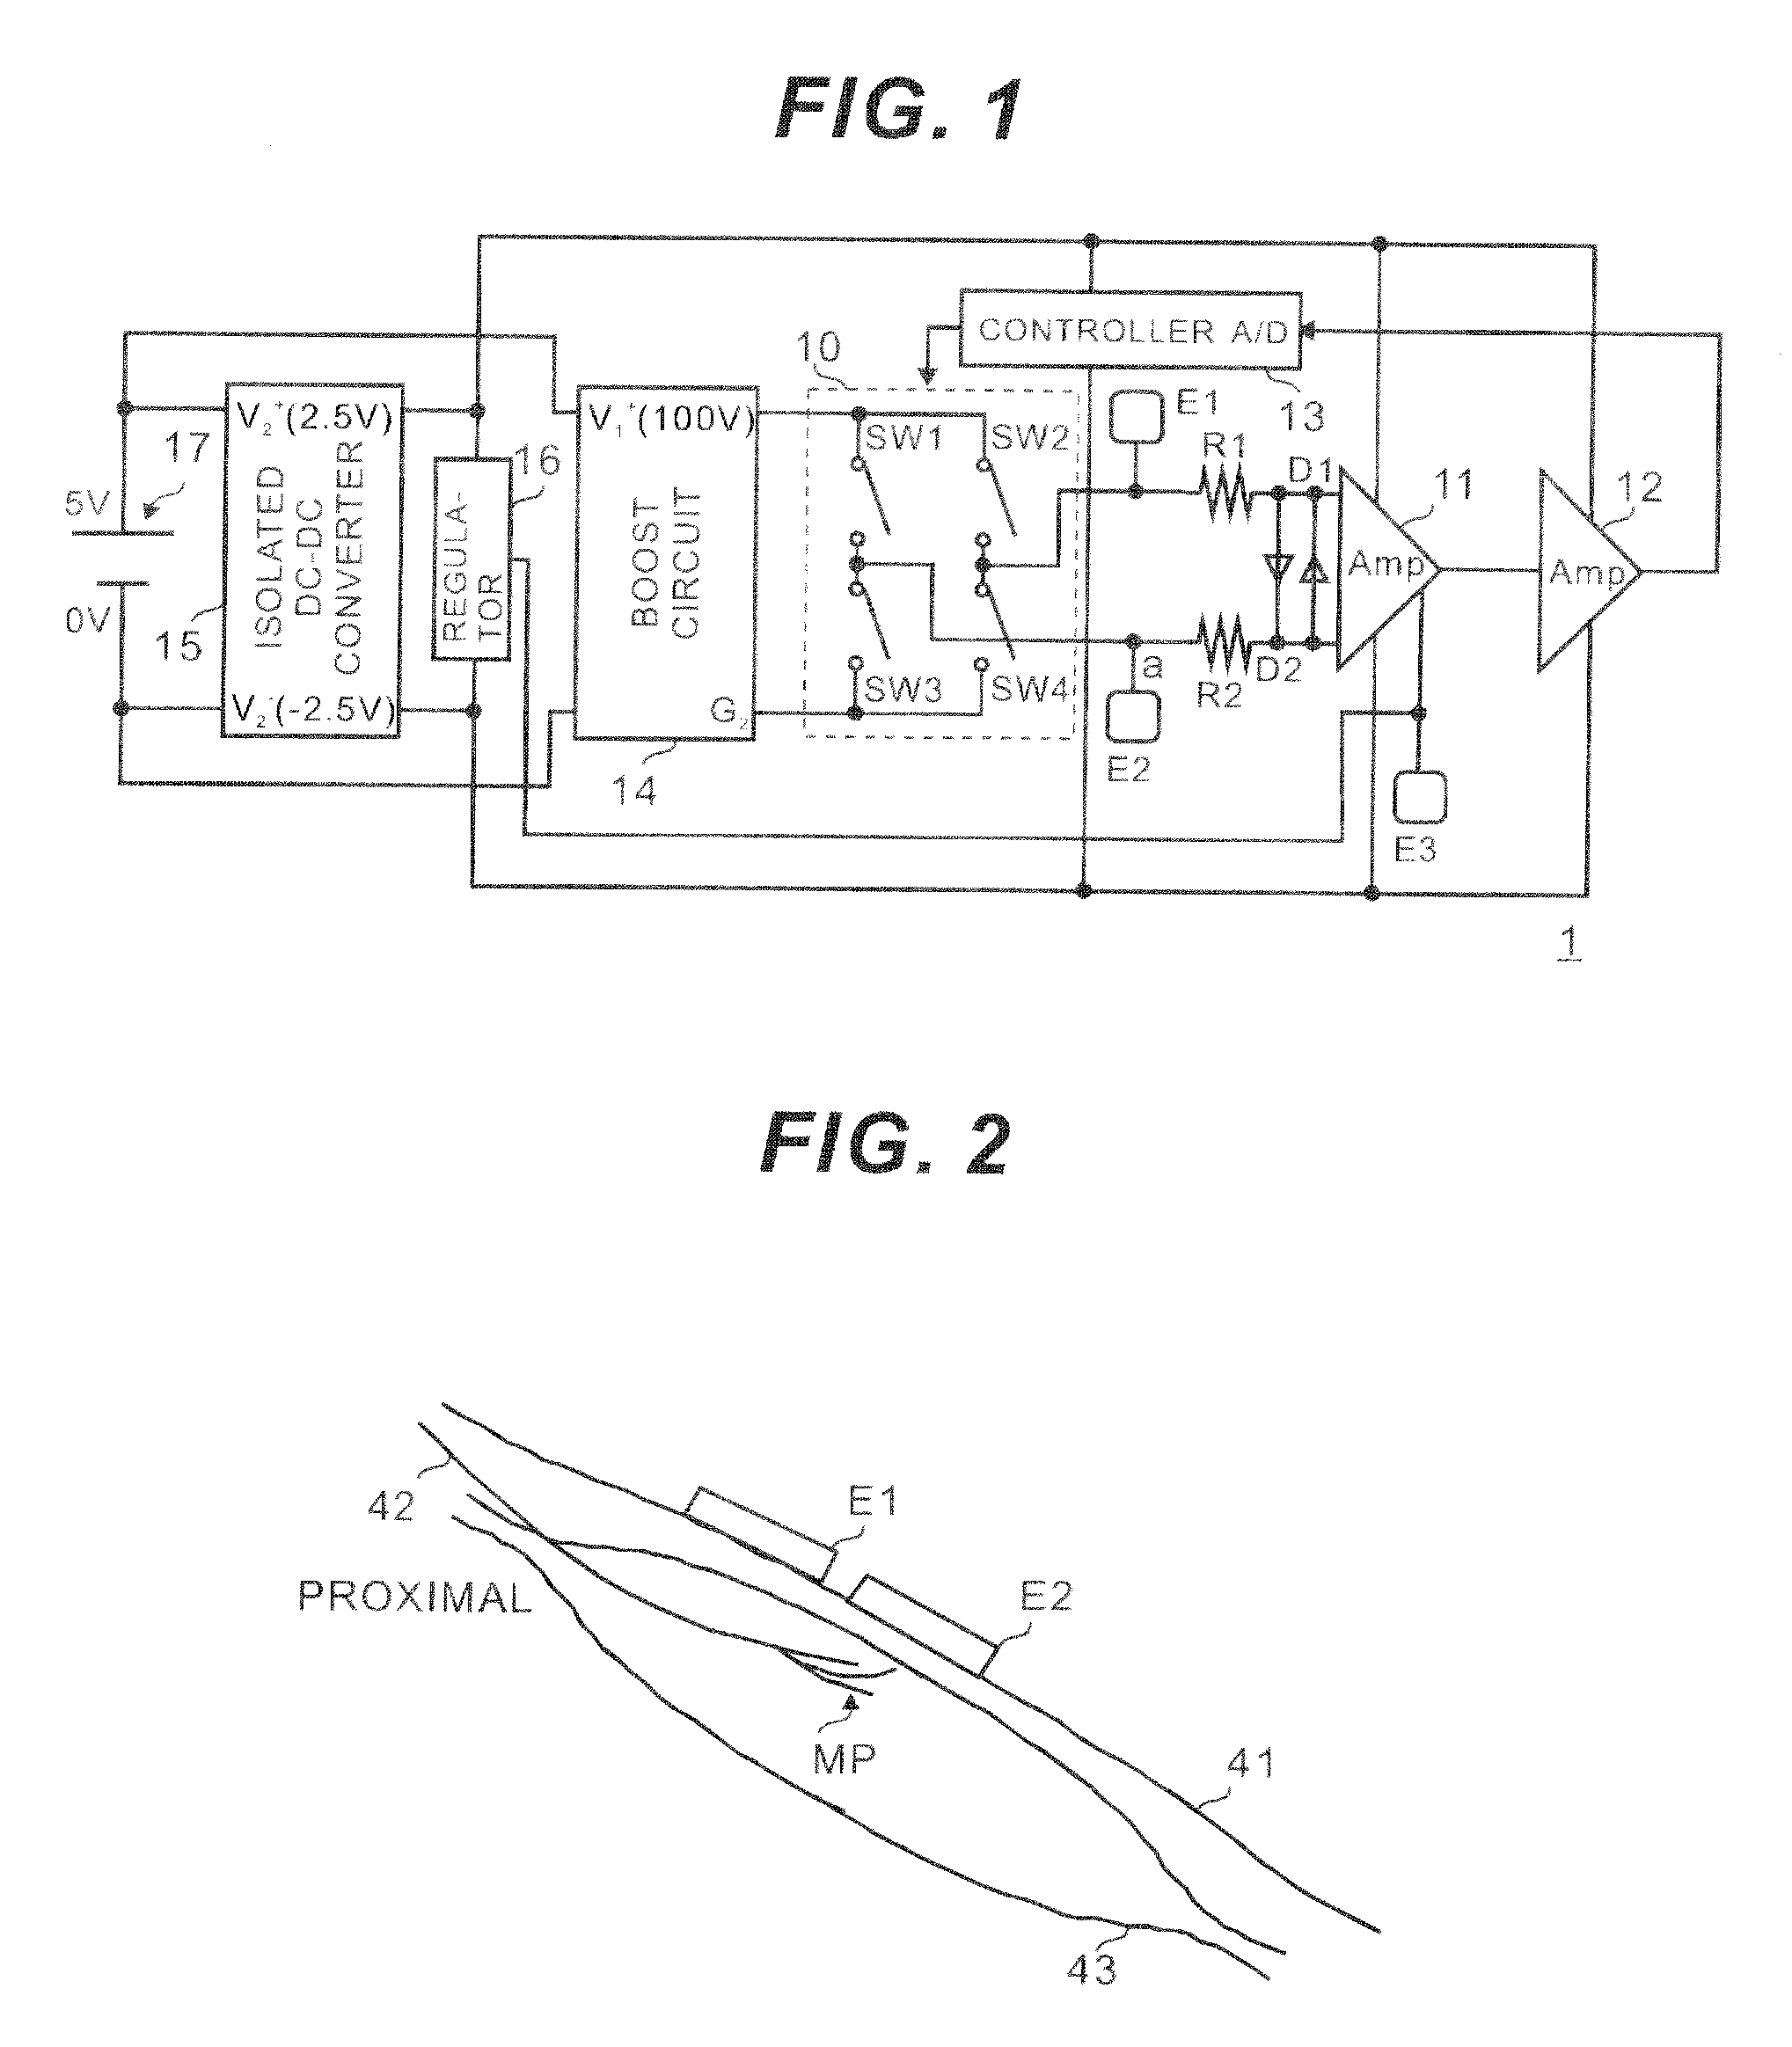 Electrostimulator capable of outputting stable electric stimulus